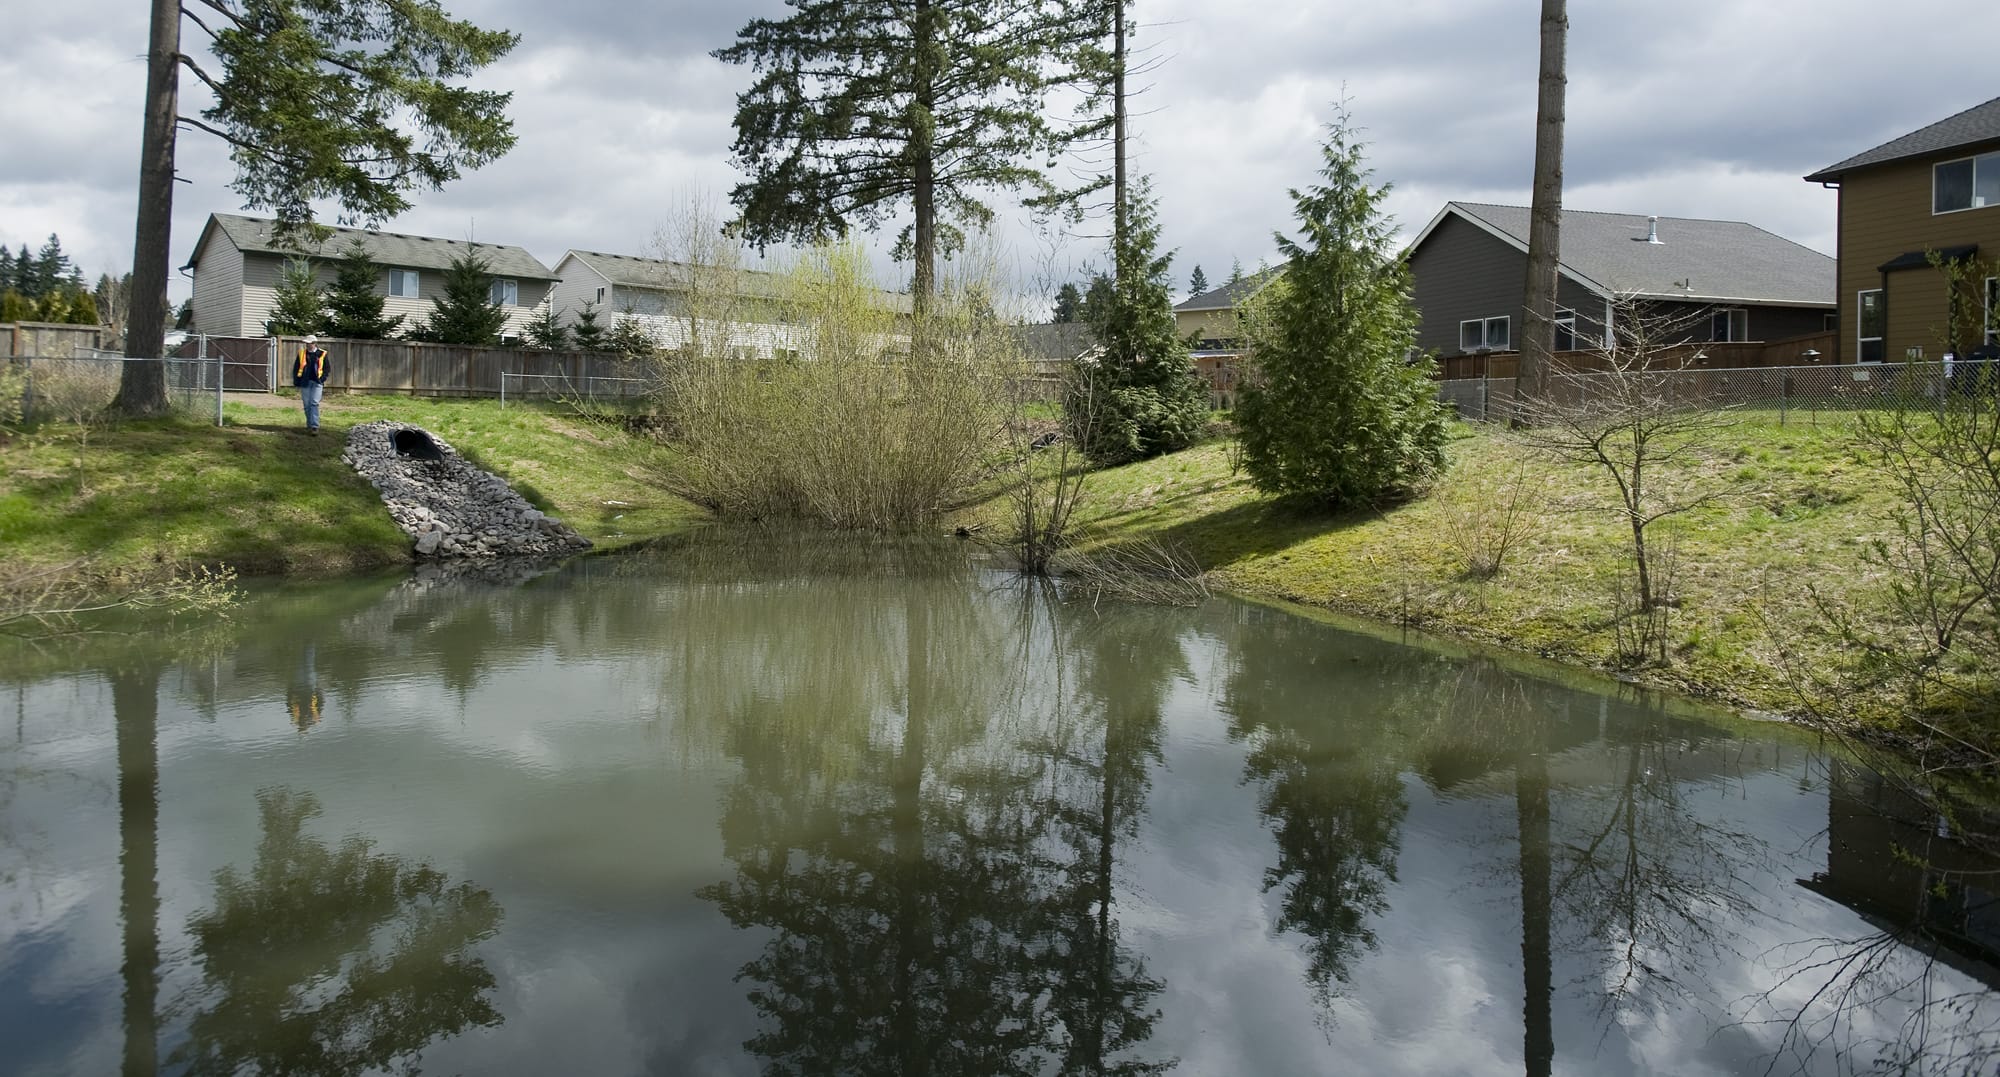 Cary Armstrong, Source Control Specialist with the Clark County Department of Environmental Services, shows a well maintained stormwater site in a Vancouver neighborhood, in 2011.